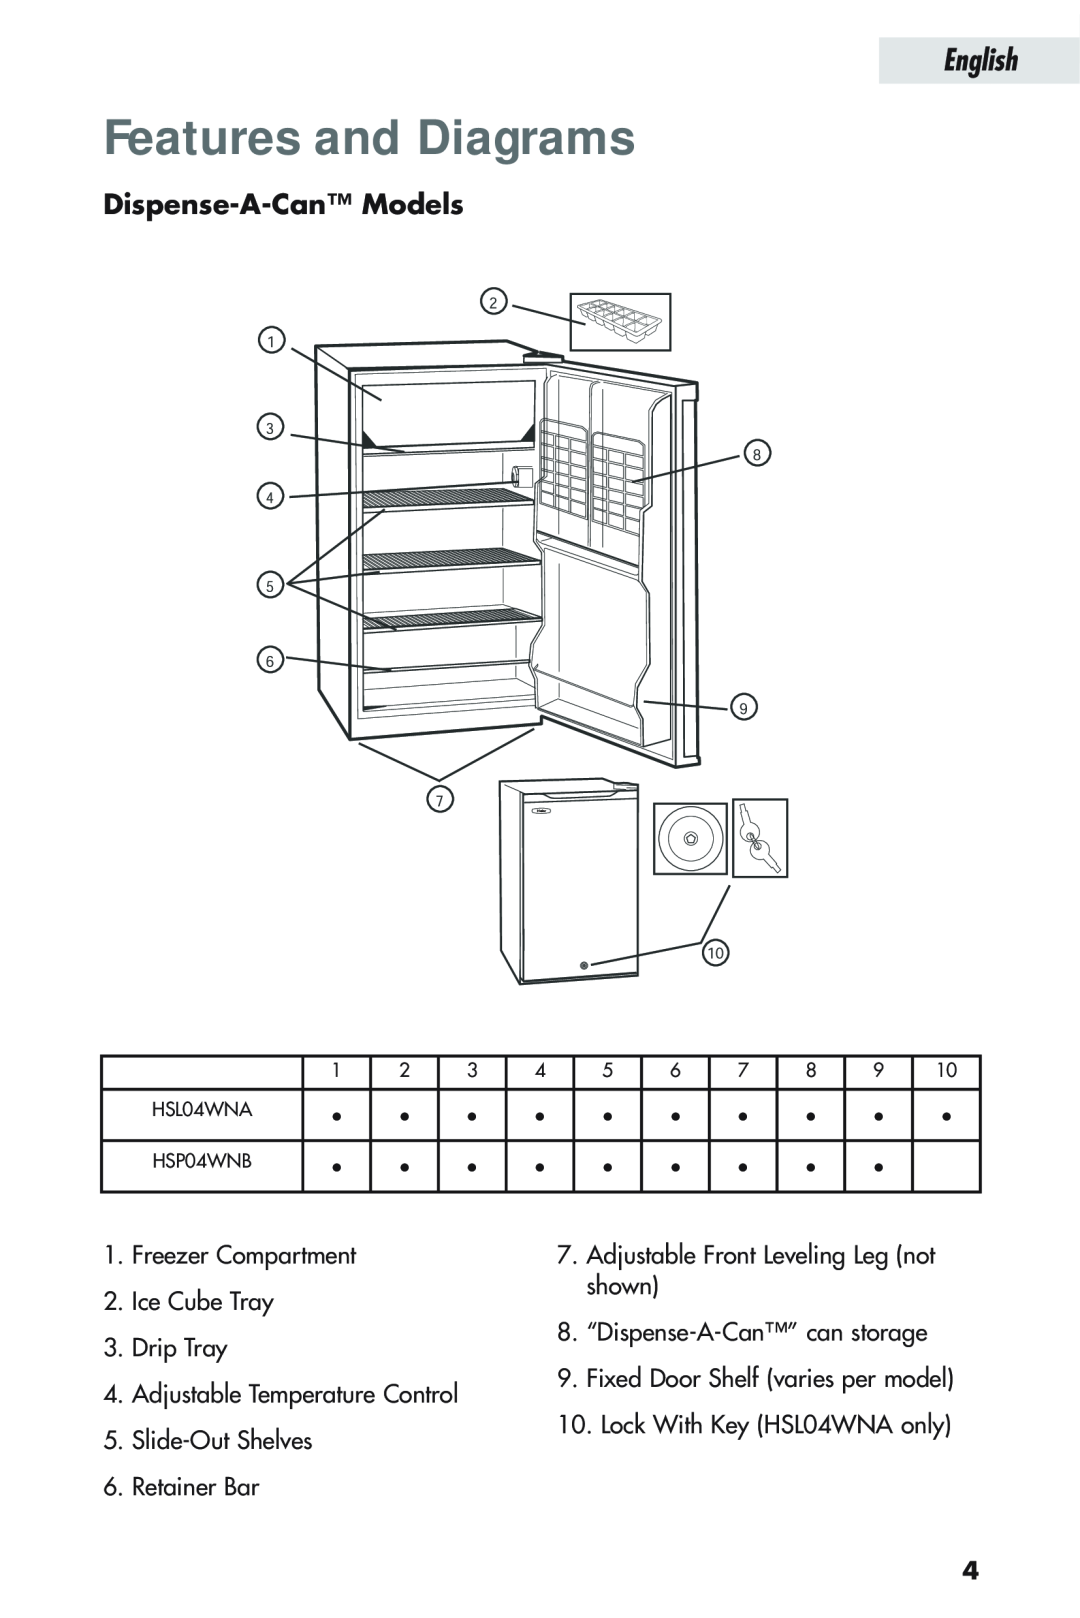 Haier HSP04WNB, HSL04WNA user manual Features and Diagrams, Dispense-A-Can Models, English 